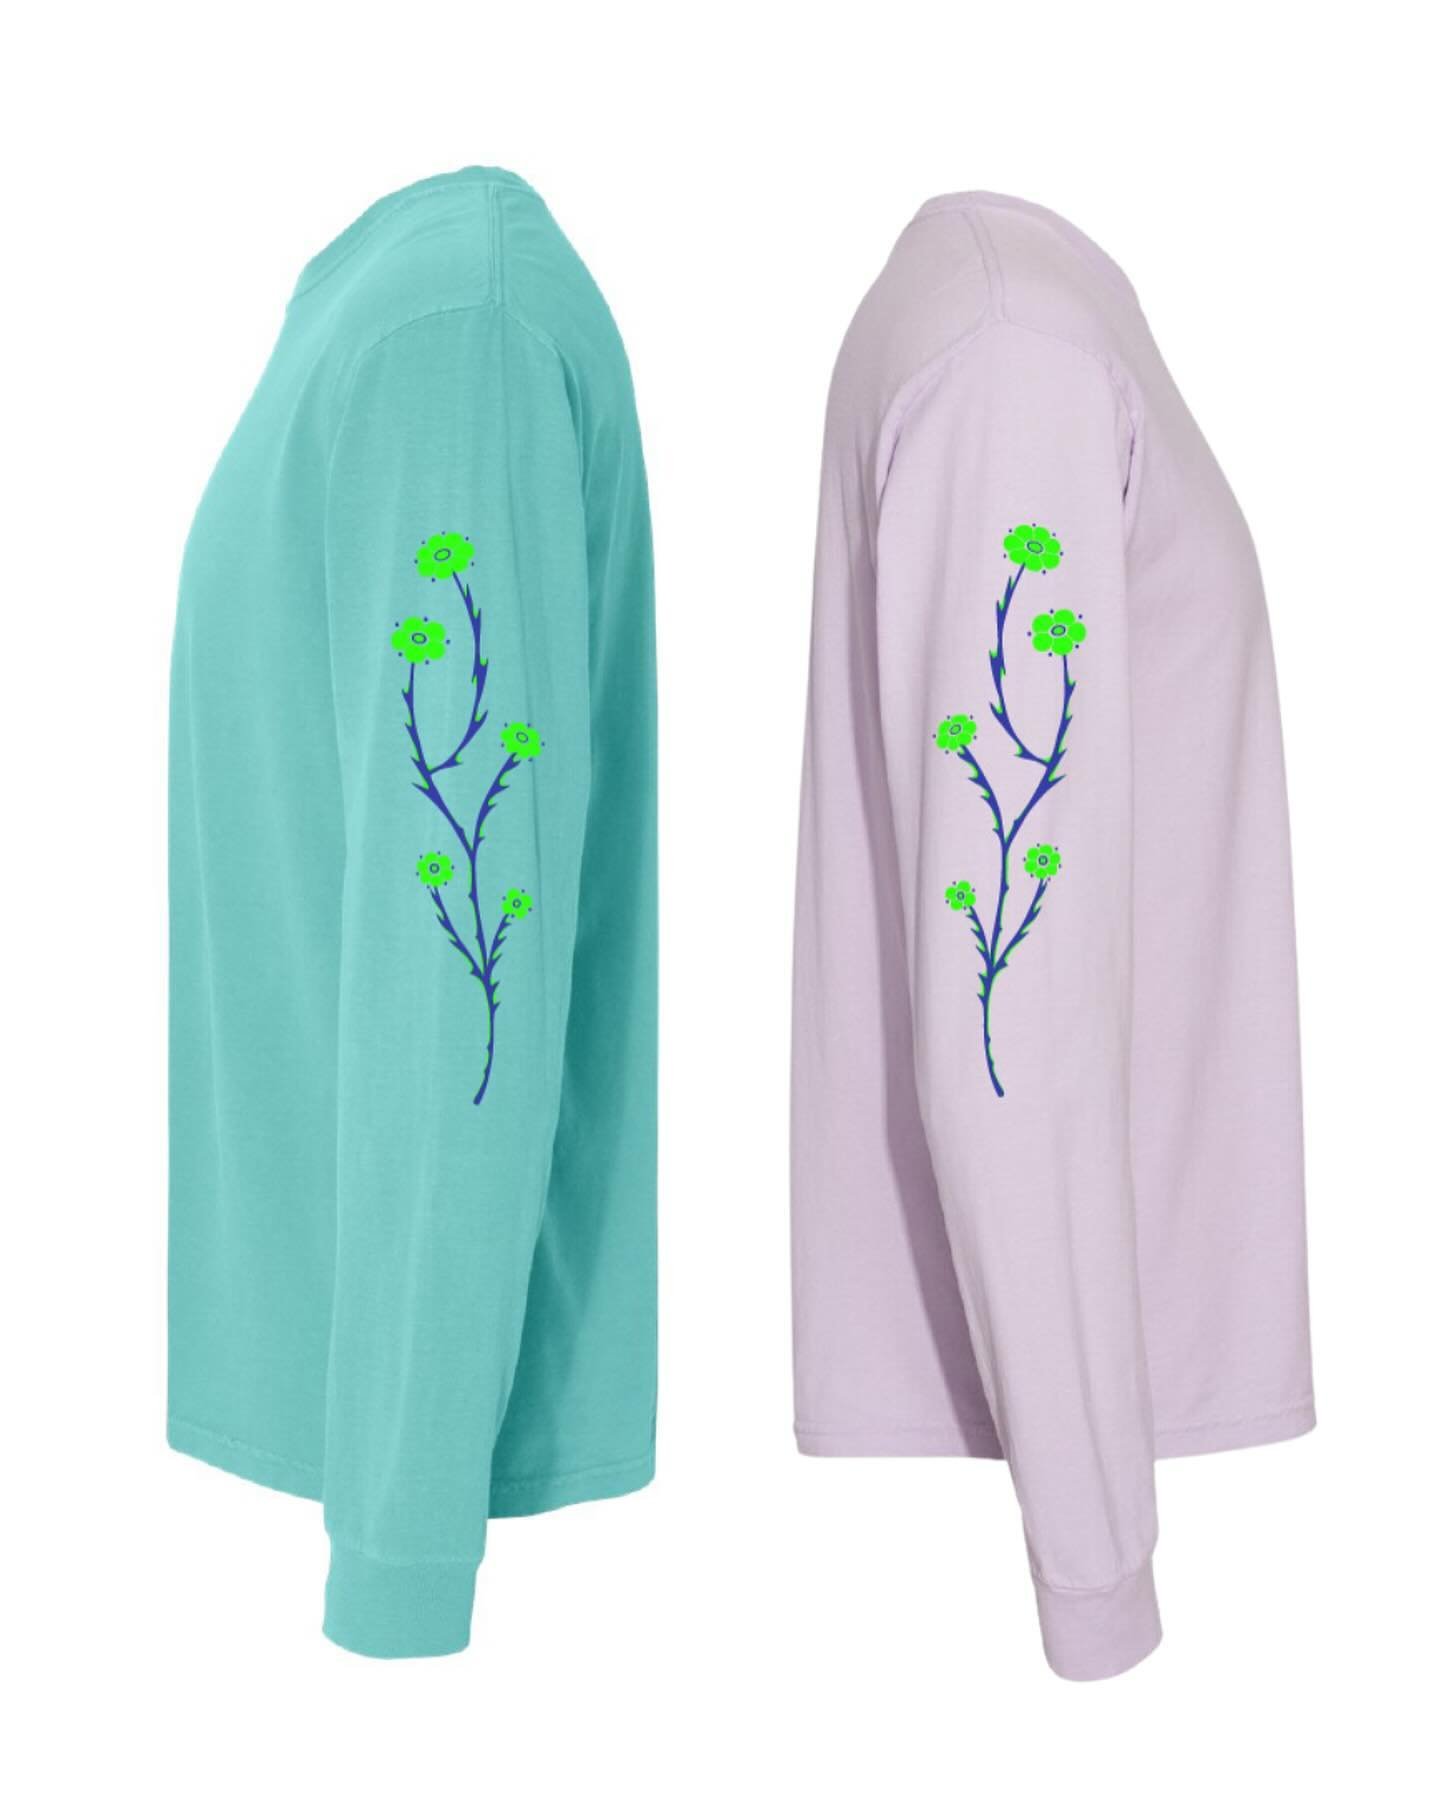 💚💜💚💜💚💜💚
We&rsquo;re running low on a few sizes of our newest merch (designed by @yourbuddyholly__ ) and we&rsquo;re in prime long sleeve weather! 

The relaxed fit of these make them cozy and cute, and we&rsquo;ve got both colours available in